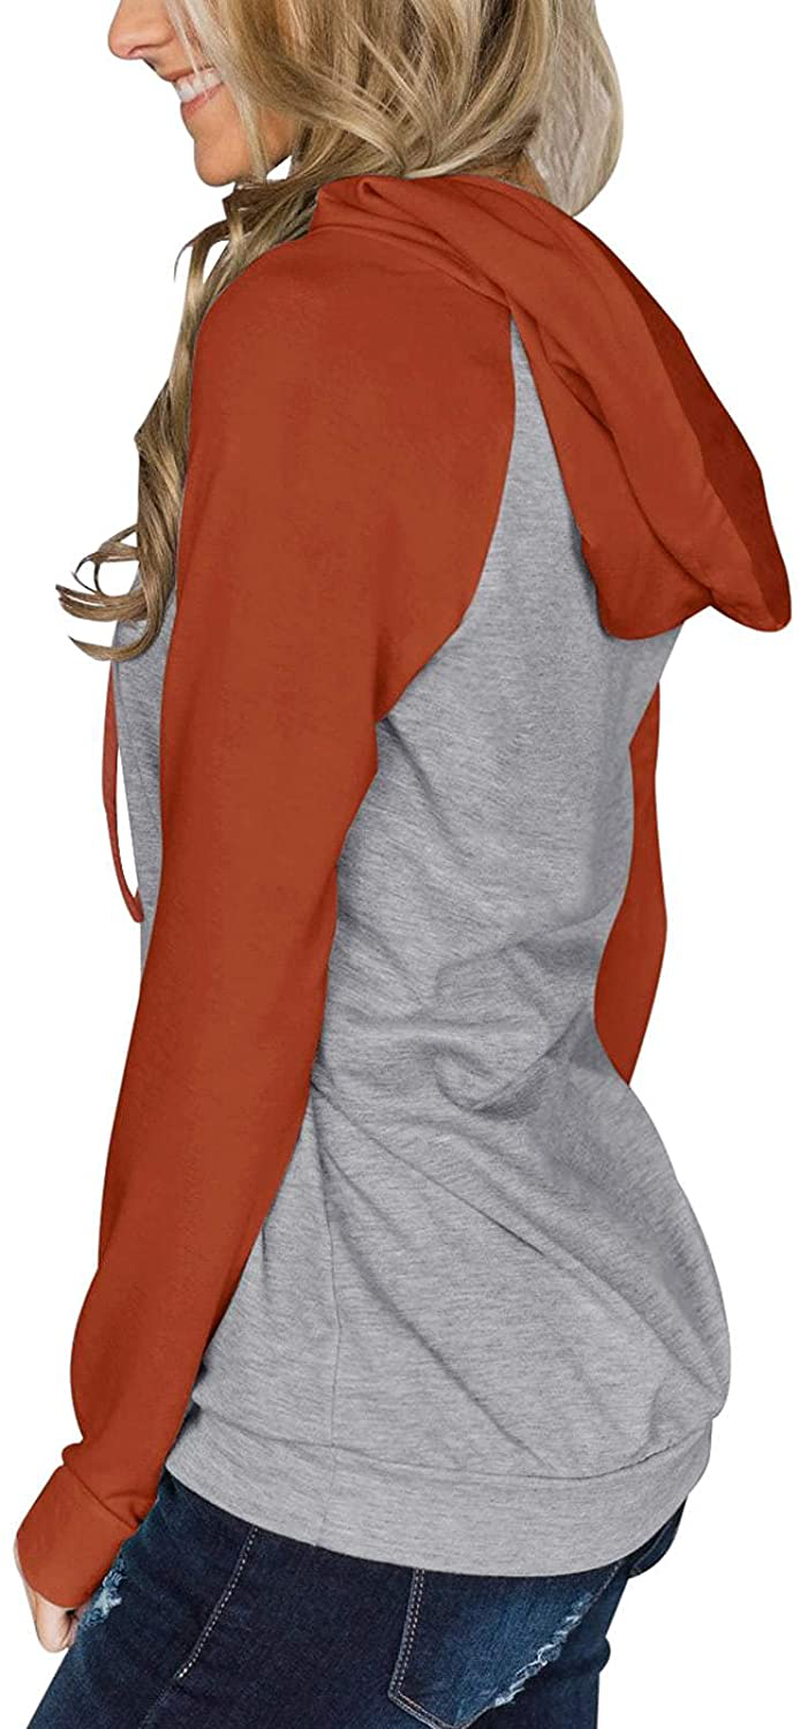 PINKMSTYLE Womens Color Block Hoodies Casual lightweight Drawstring Pullover Sweatshirt Fall Long Sleeve Tops with Pocket